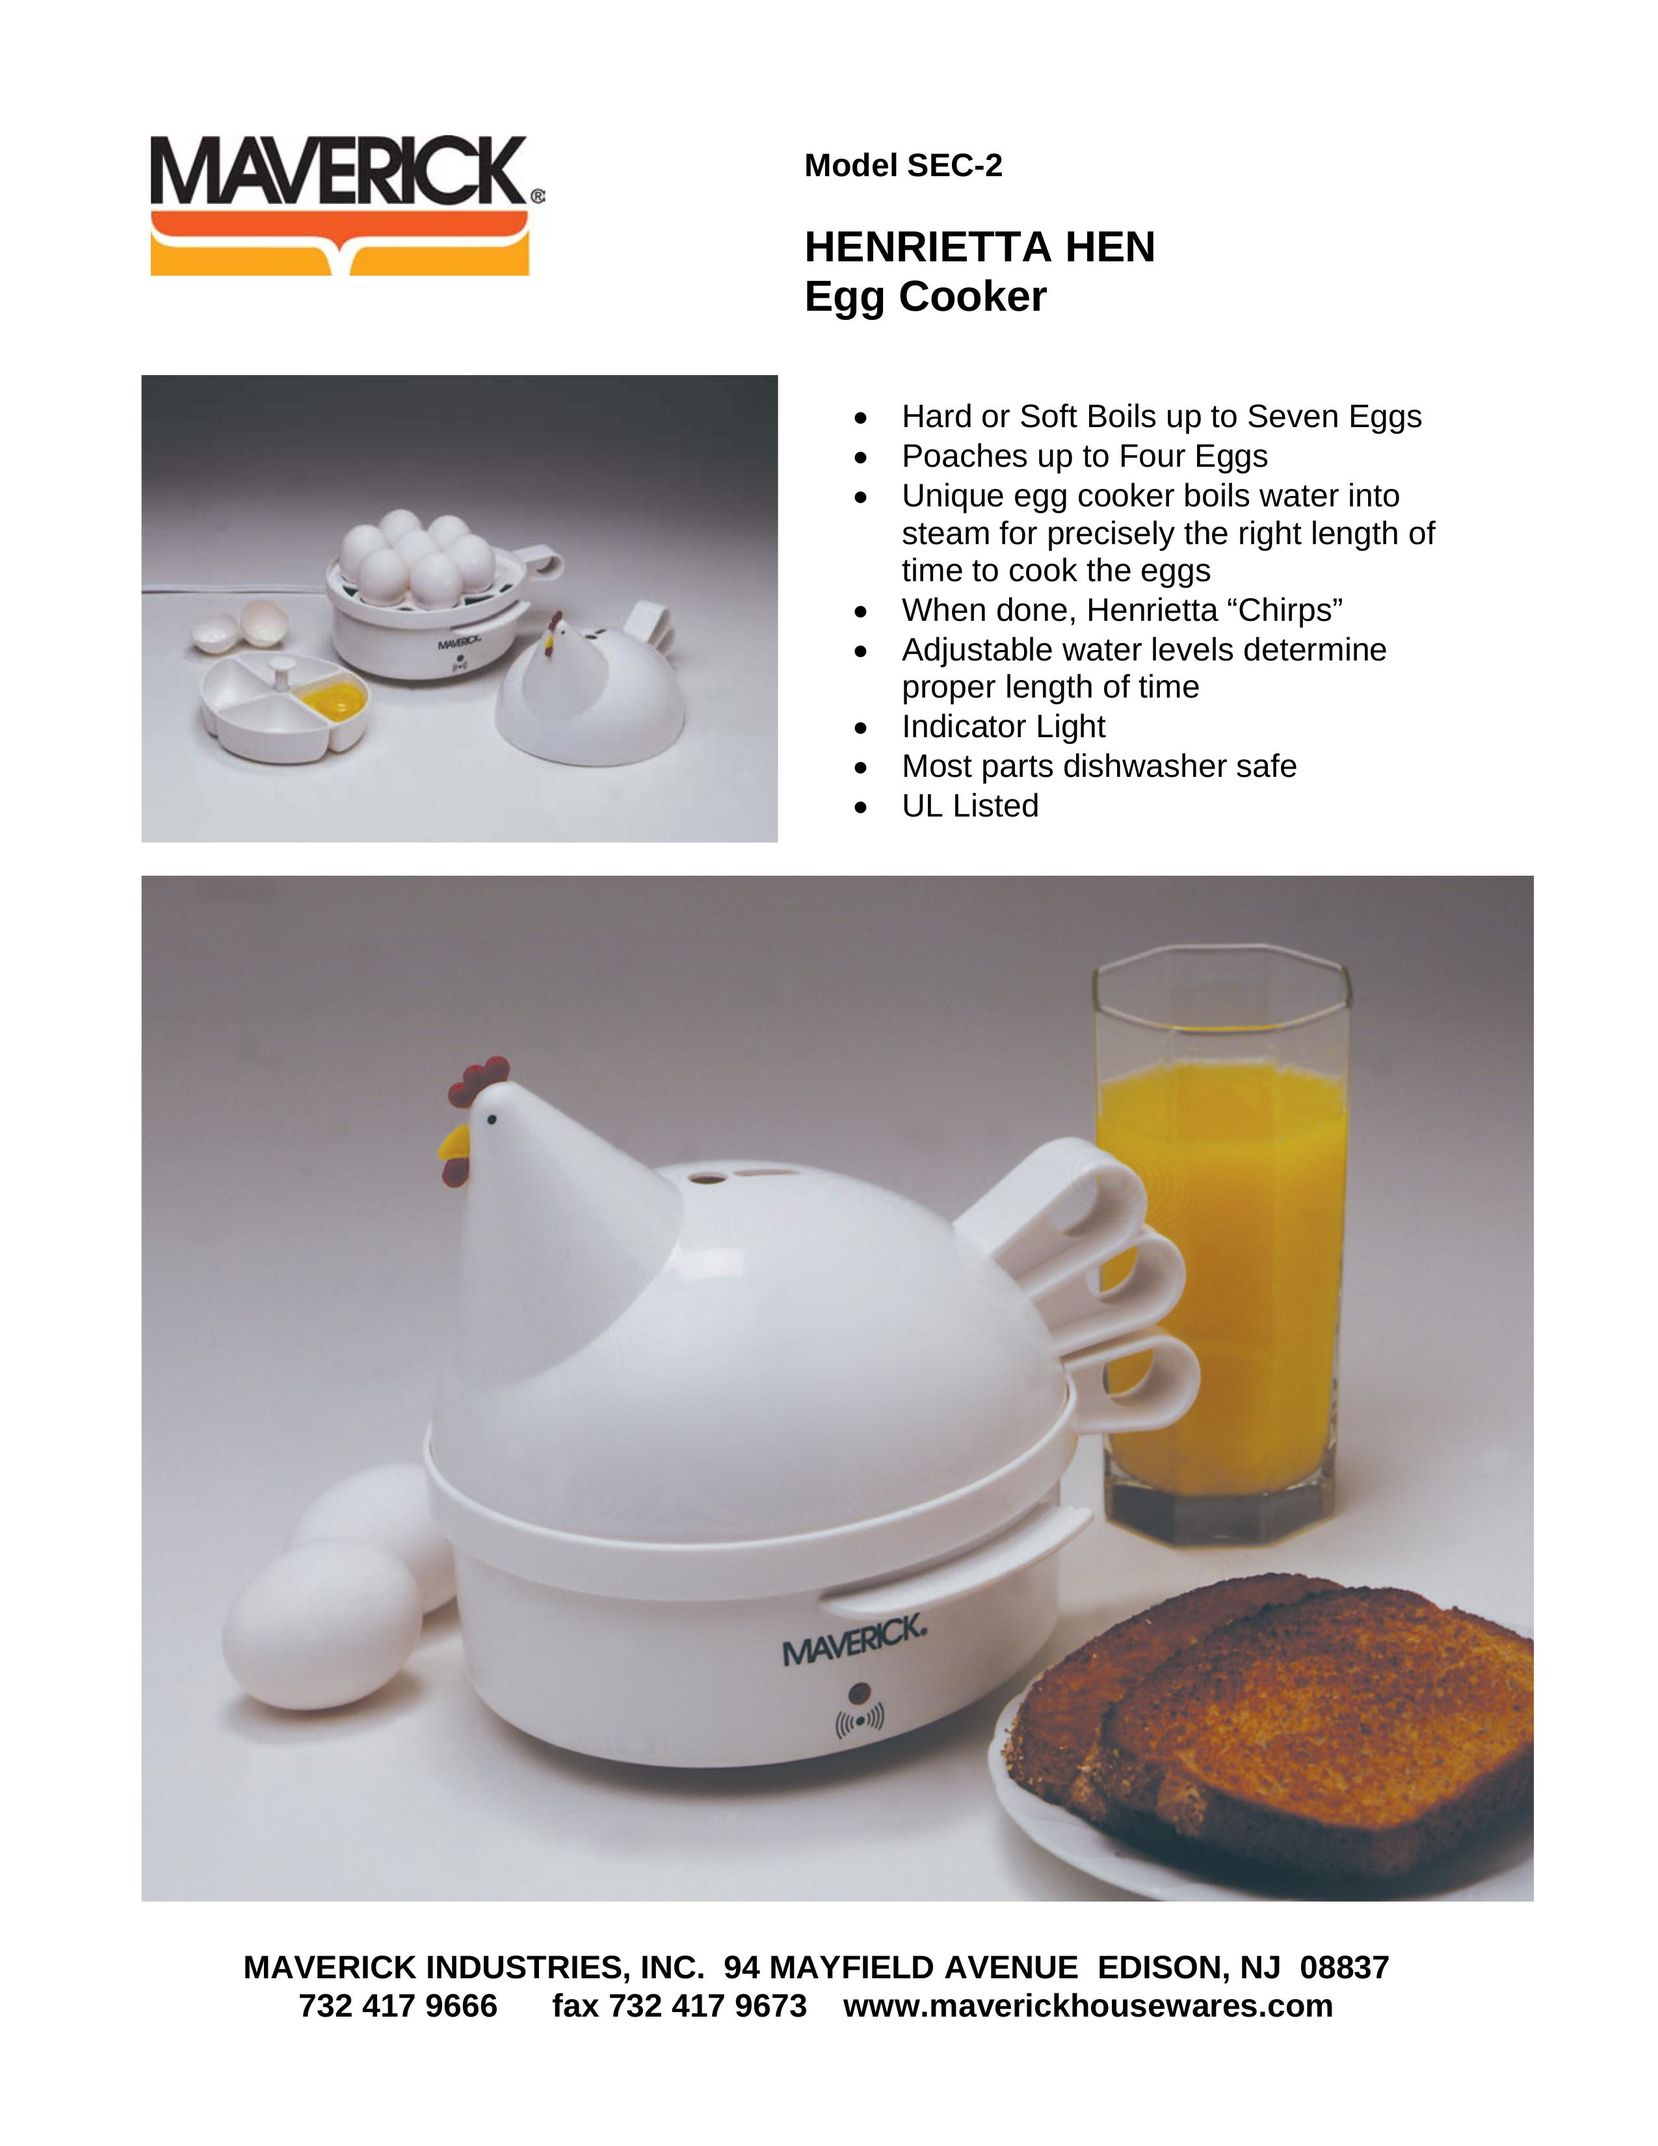 TIMEX Weather Products SEC-2 Egg Cooker User Manual